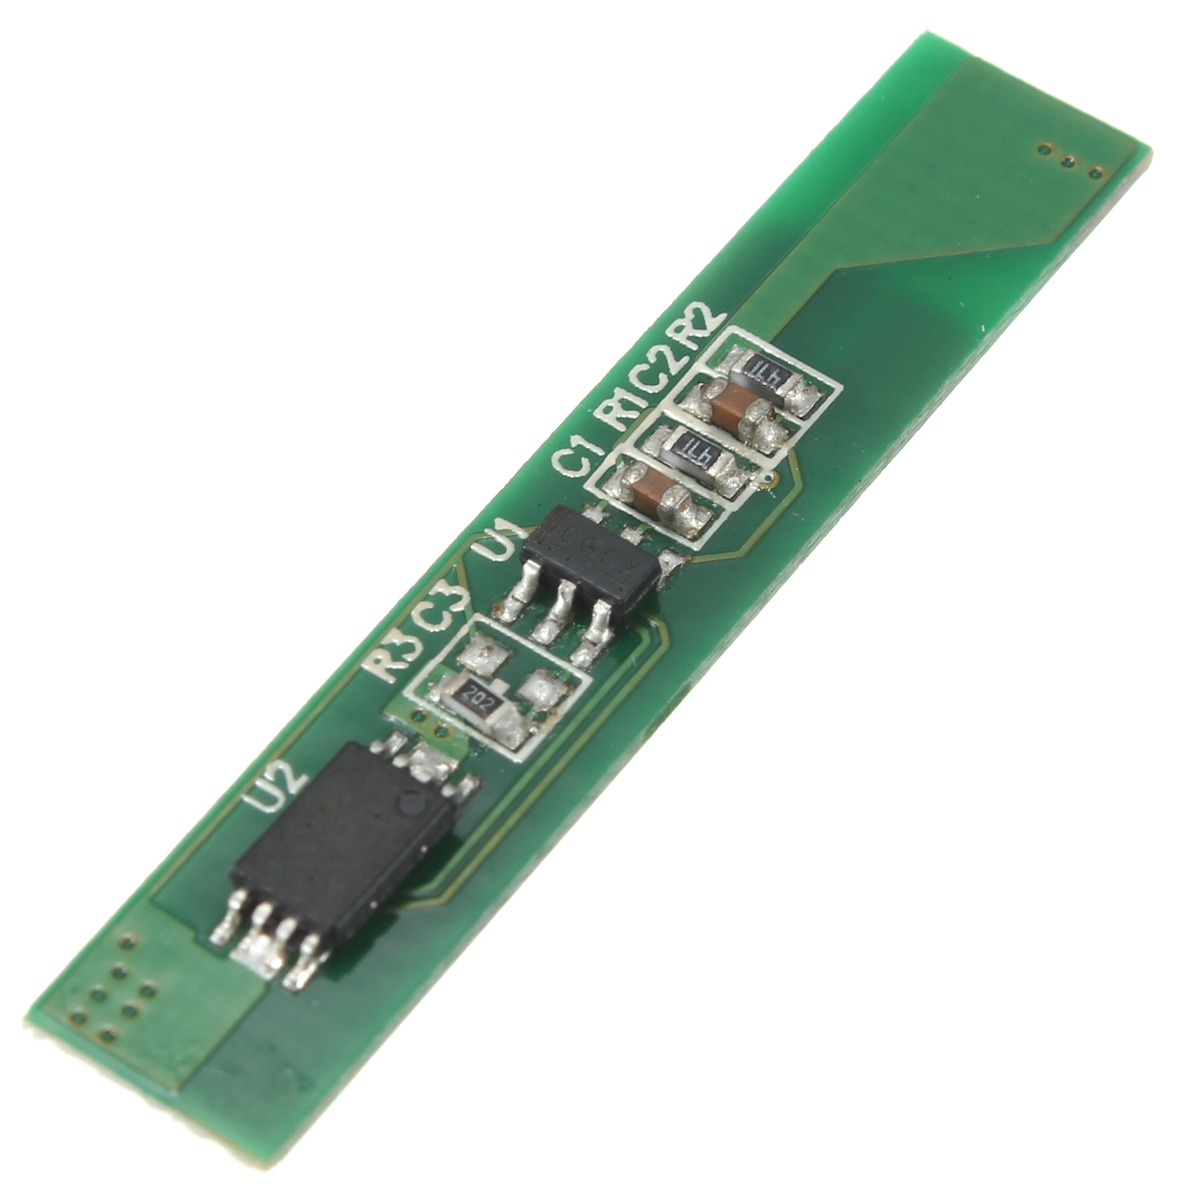 Hot Sale 2S 18650 lithium battery Input Ouput Charger chargering Protection Board PCB 7.2V / 8.6V 3A